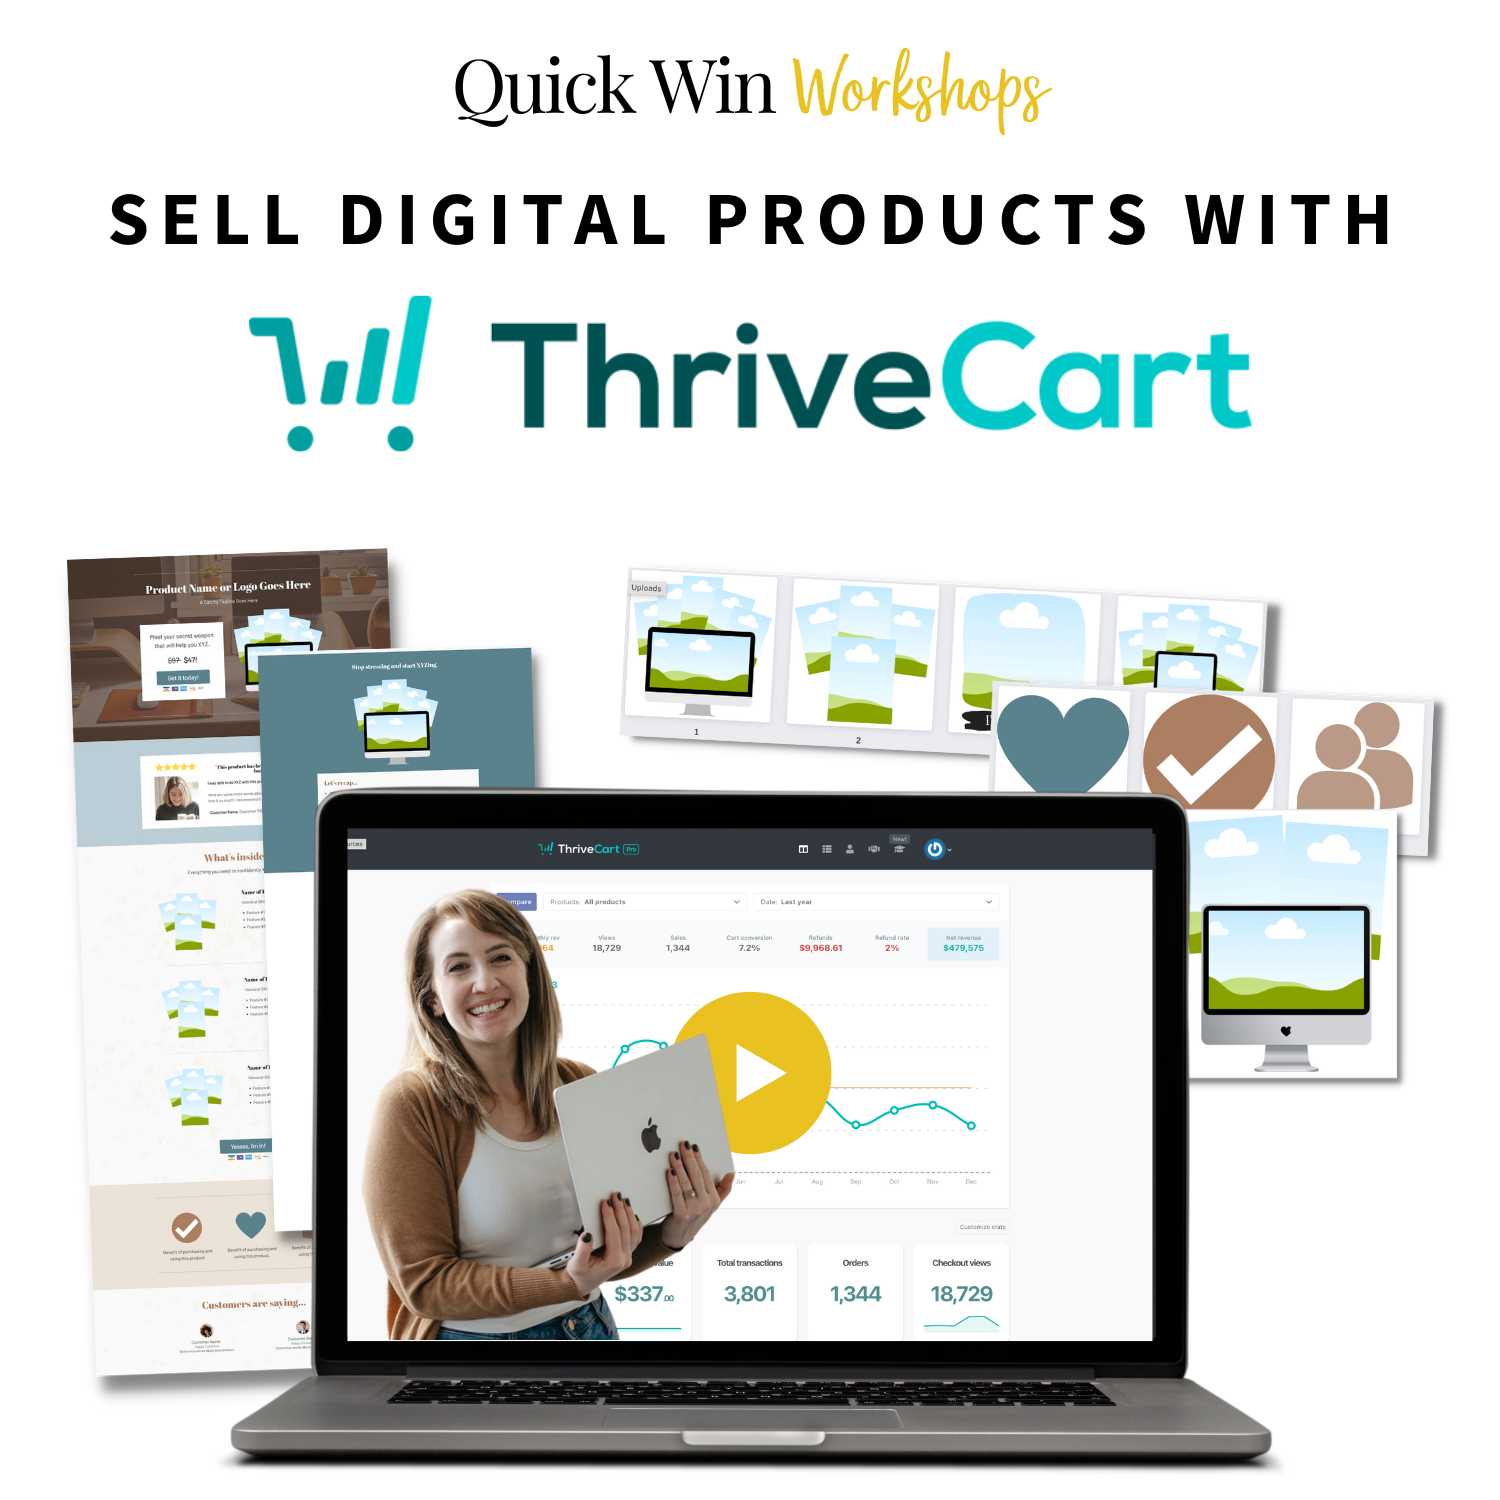 Quick Win Workshop: How to Sell Digital Products with ThriveCart